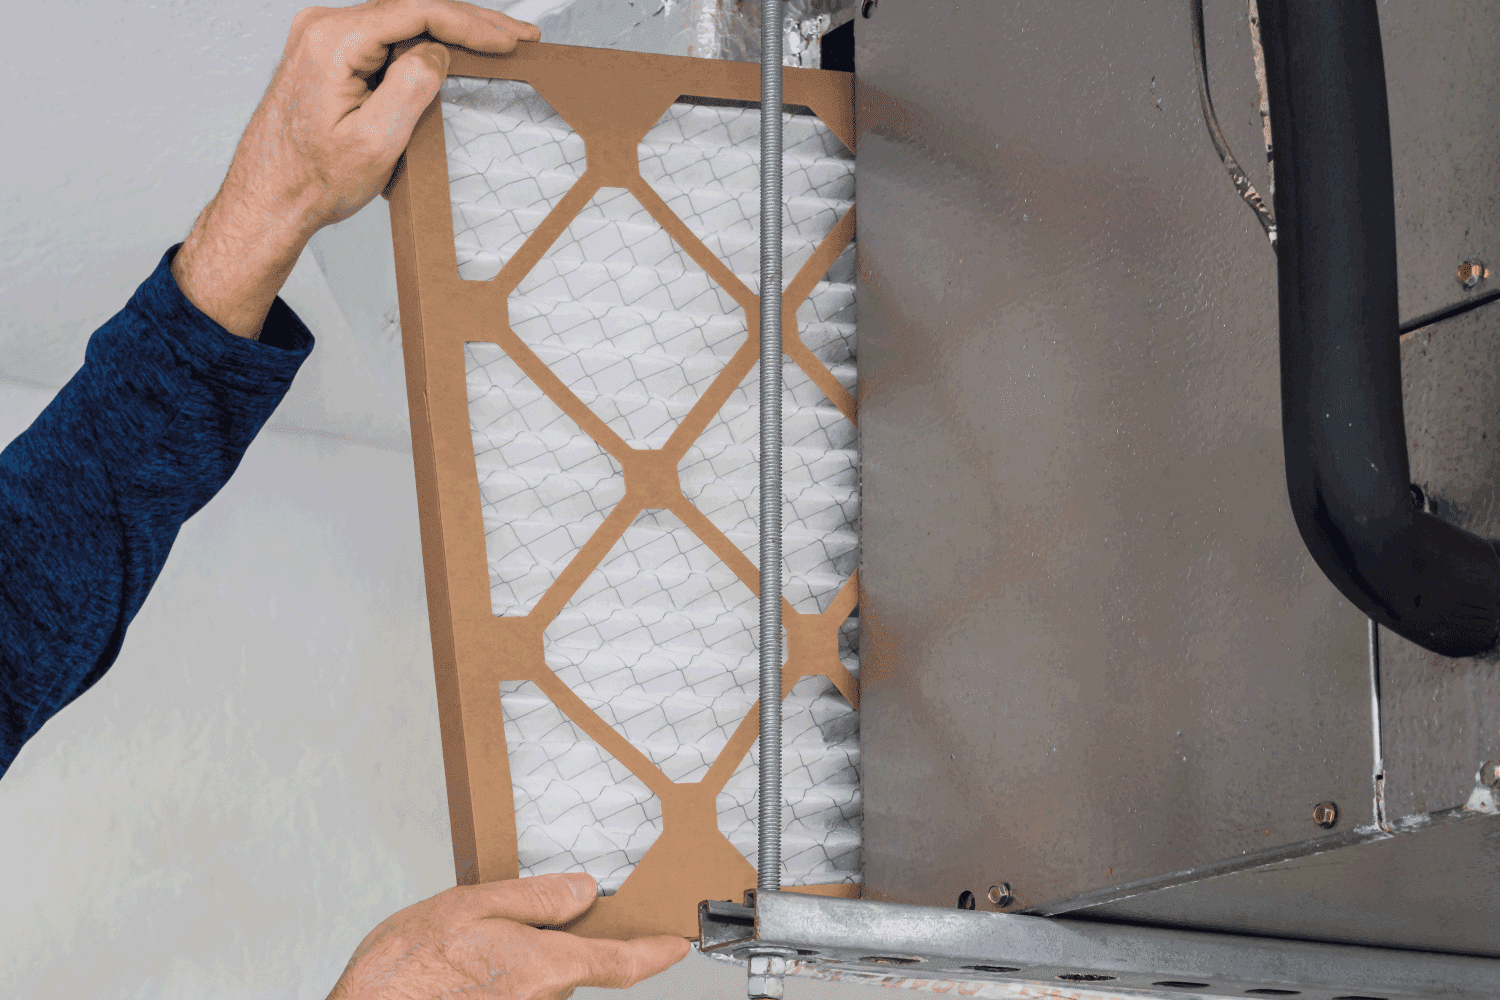 HVAC service technician changing dirty indoor air filter in residential heating and air conditioning system